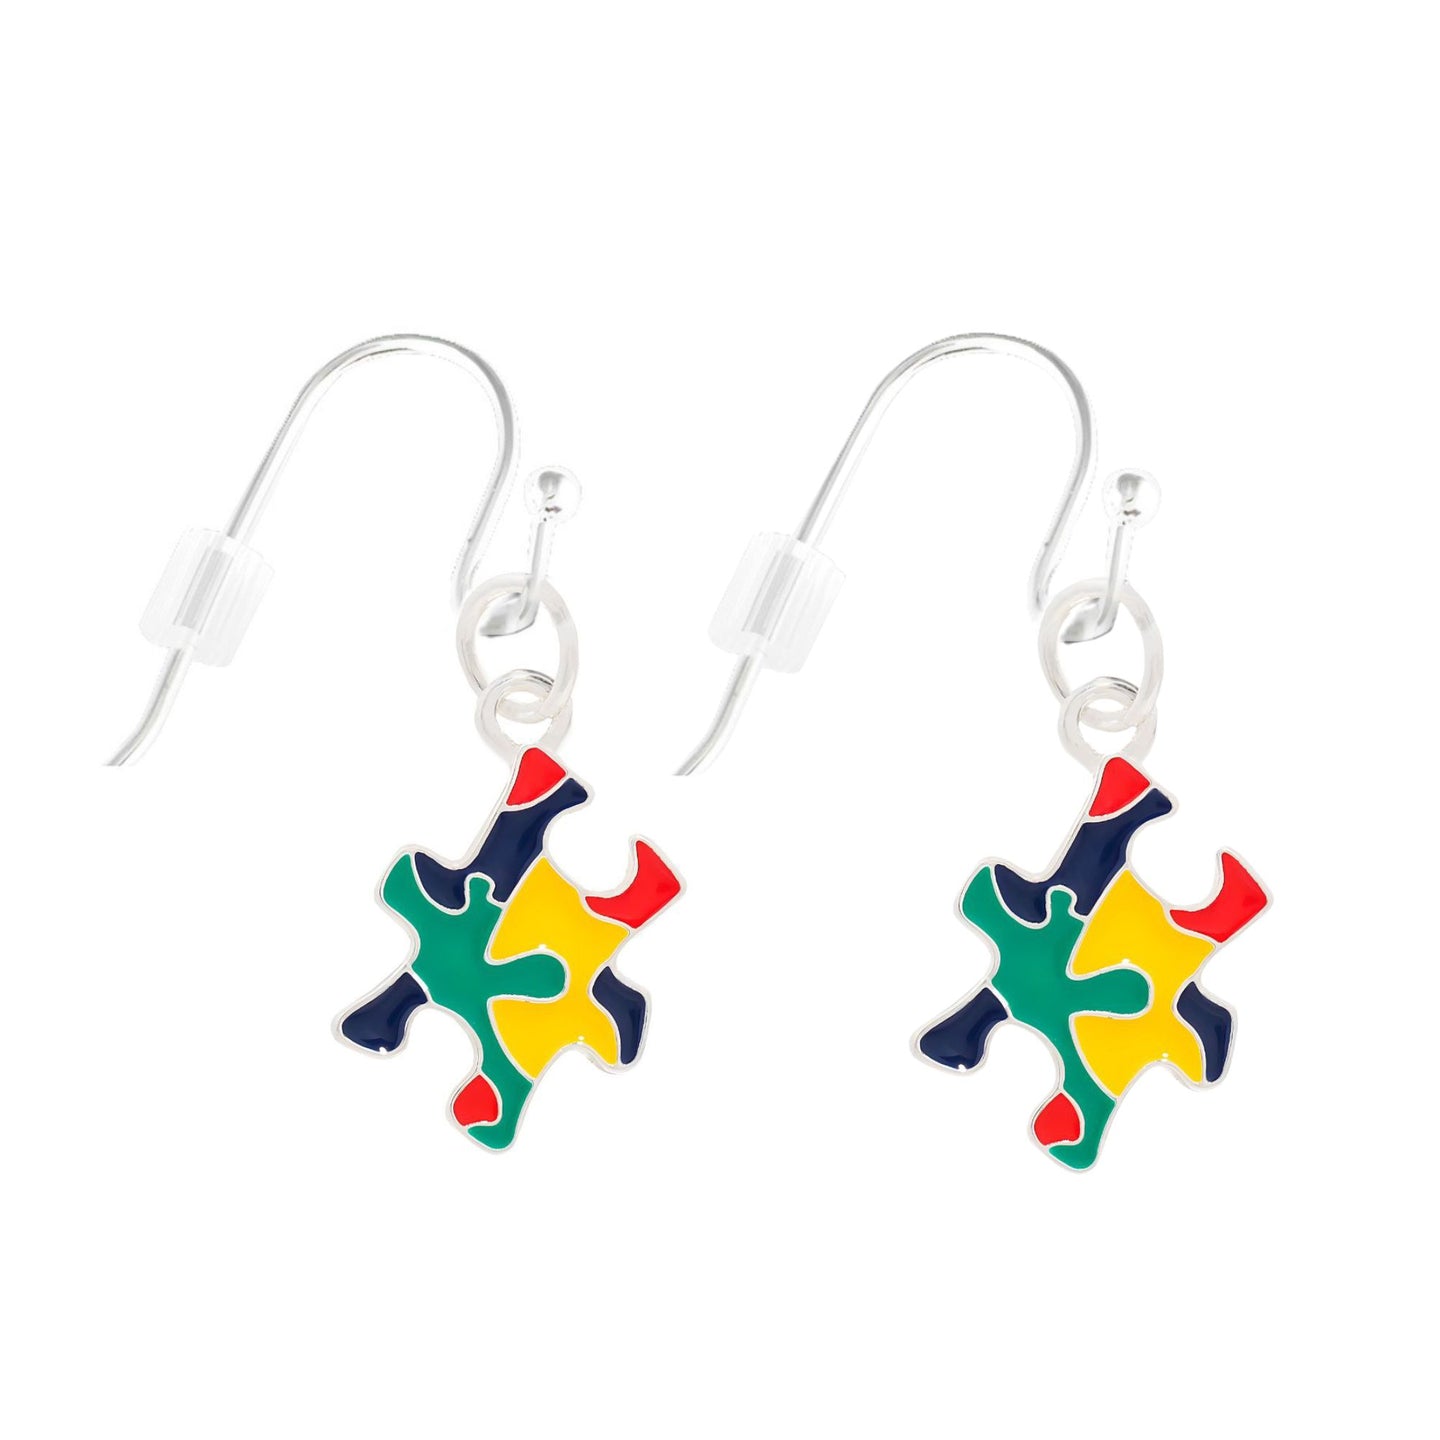 Autism Colored Puzzle Piece Hanging Earrings